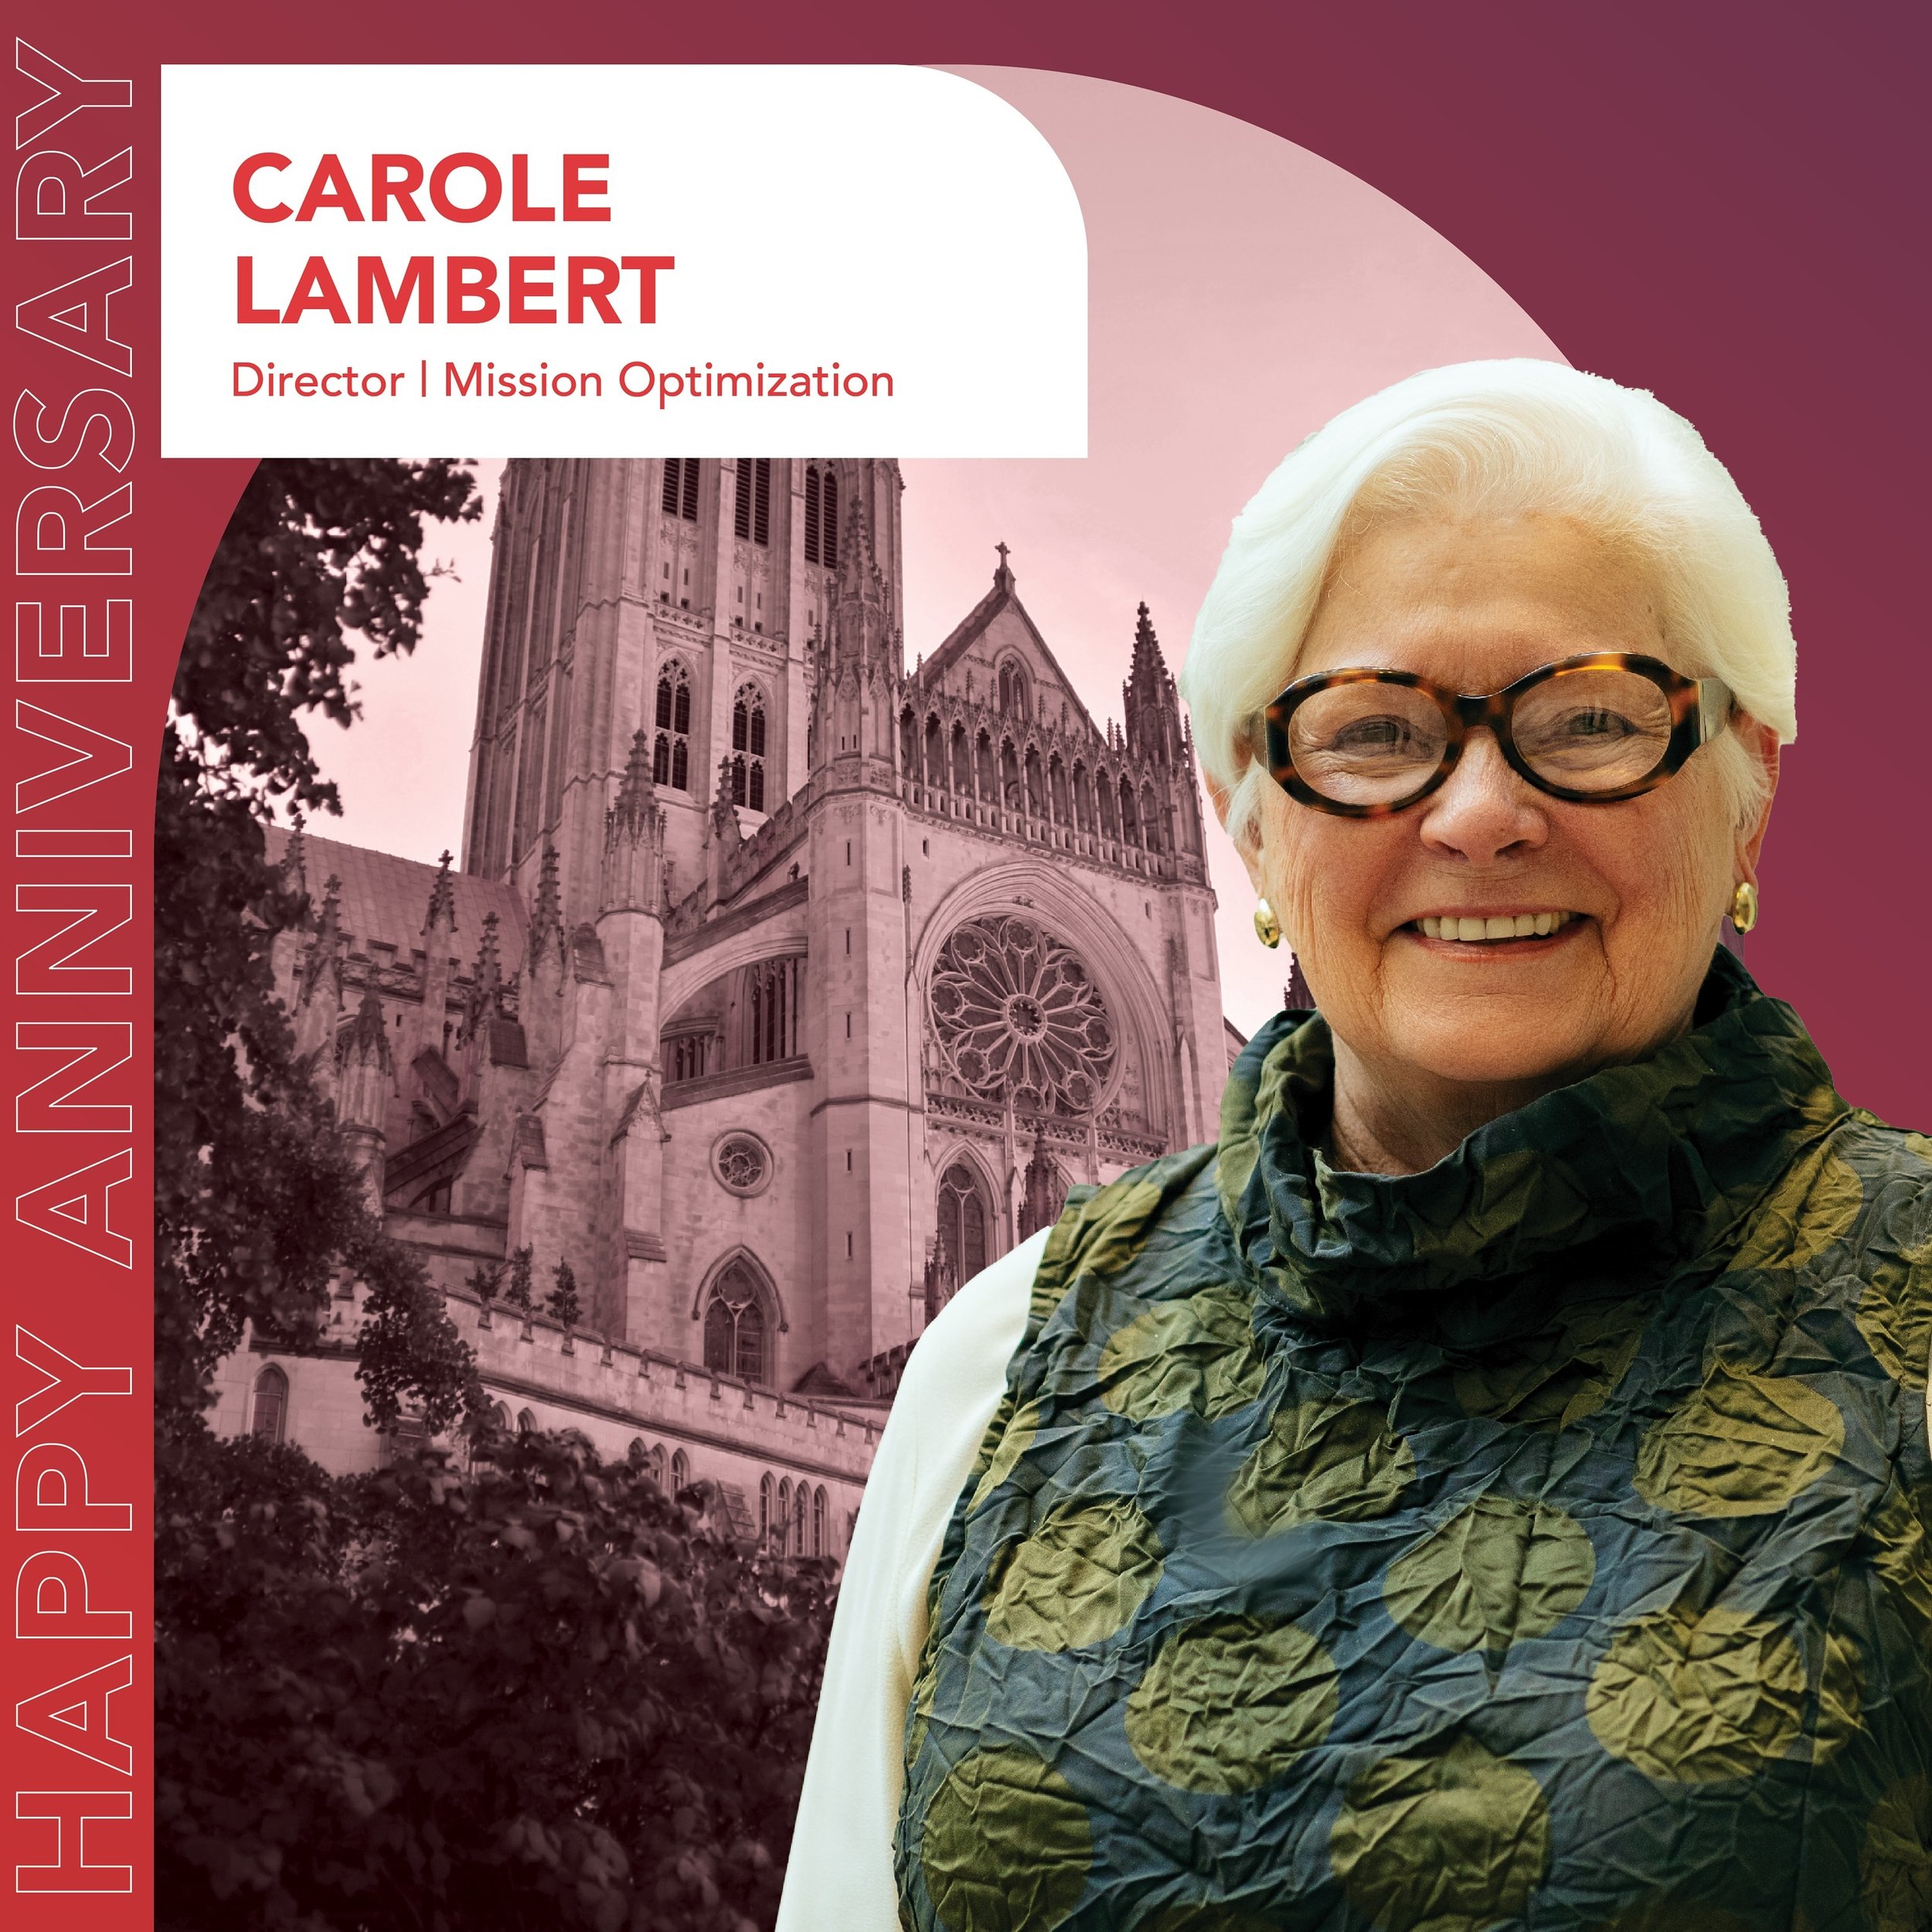 Four years ago, Carole Lambert came to us after a highly accomplished career in the healthcare field. To put into words all that Carole does daily as our Director of Mission Optimization would be impossible. Suffice to say, she keeps an enormous amou